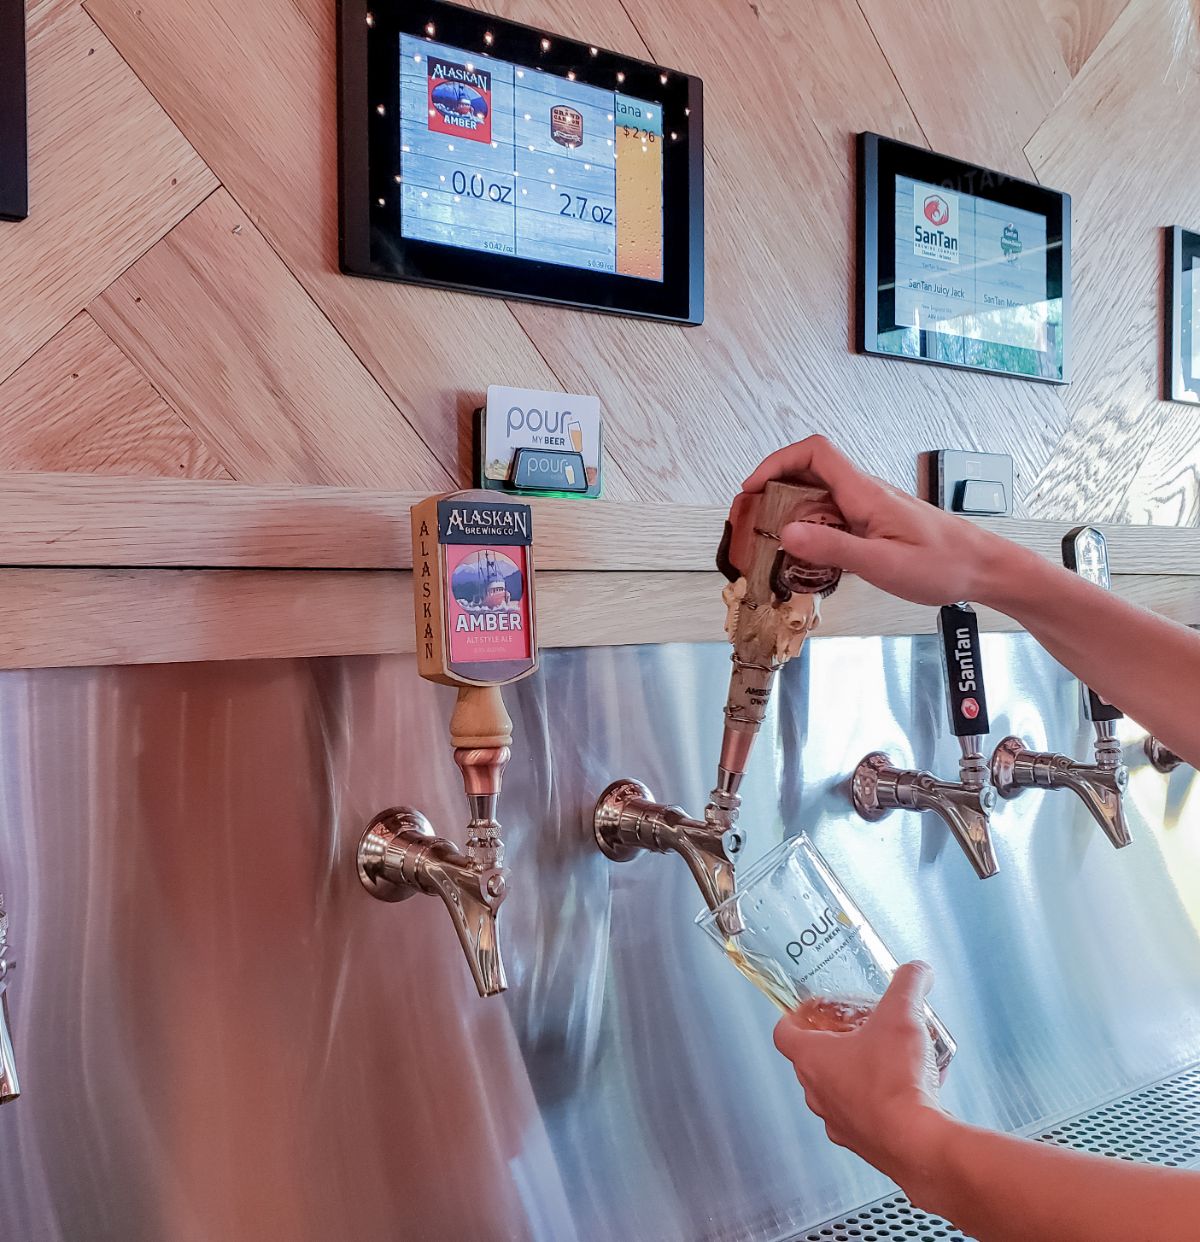 Proudly boasting The Most Reliable System On The Market, PourMyBeer provides an easy-to-use system at a 20% decreased labor cost.